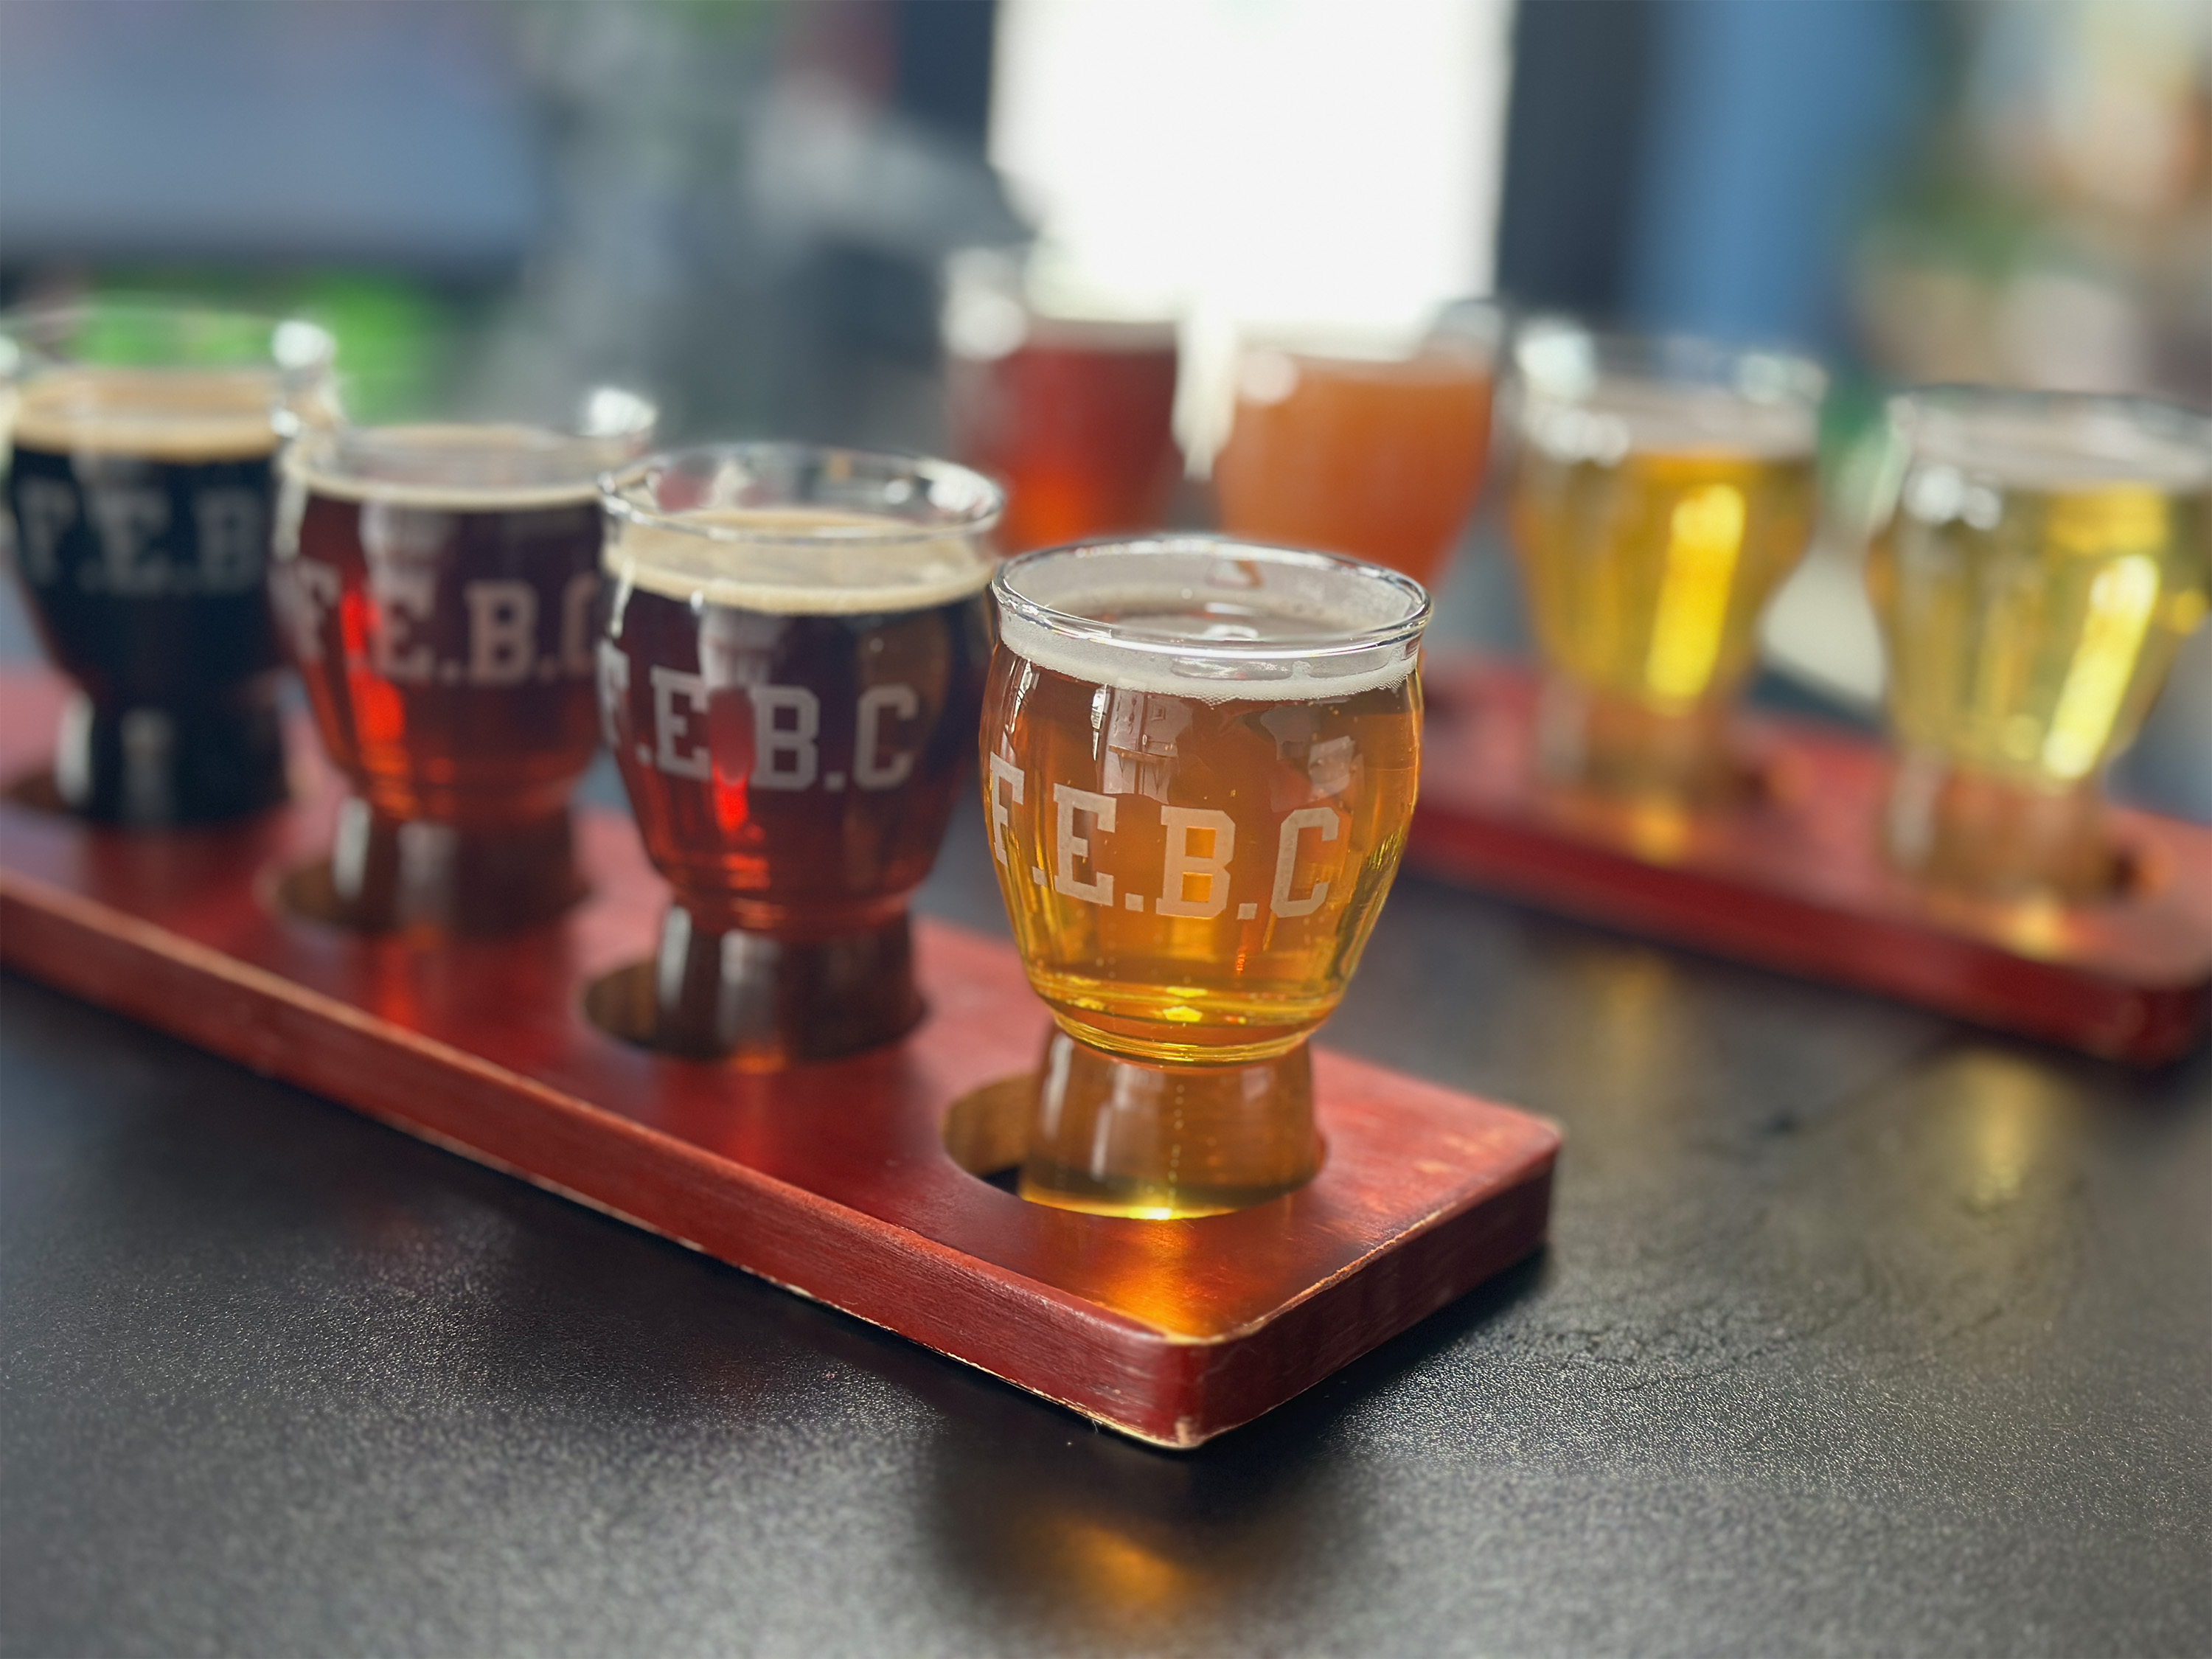 A flight of beers at Freedom’s Edge Brewing Company.Photo Credit: Amber Leberman